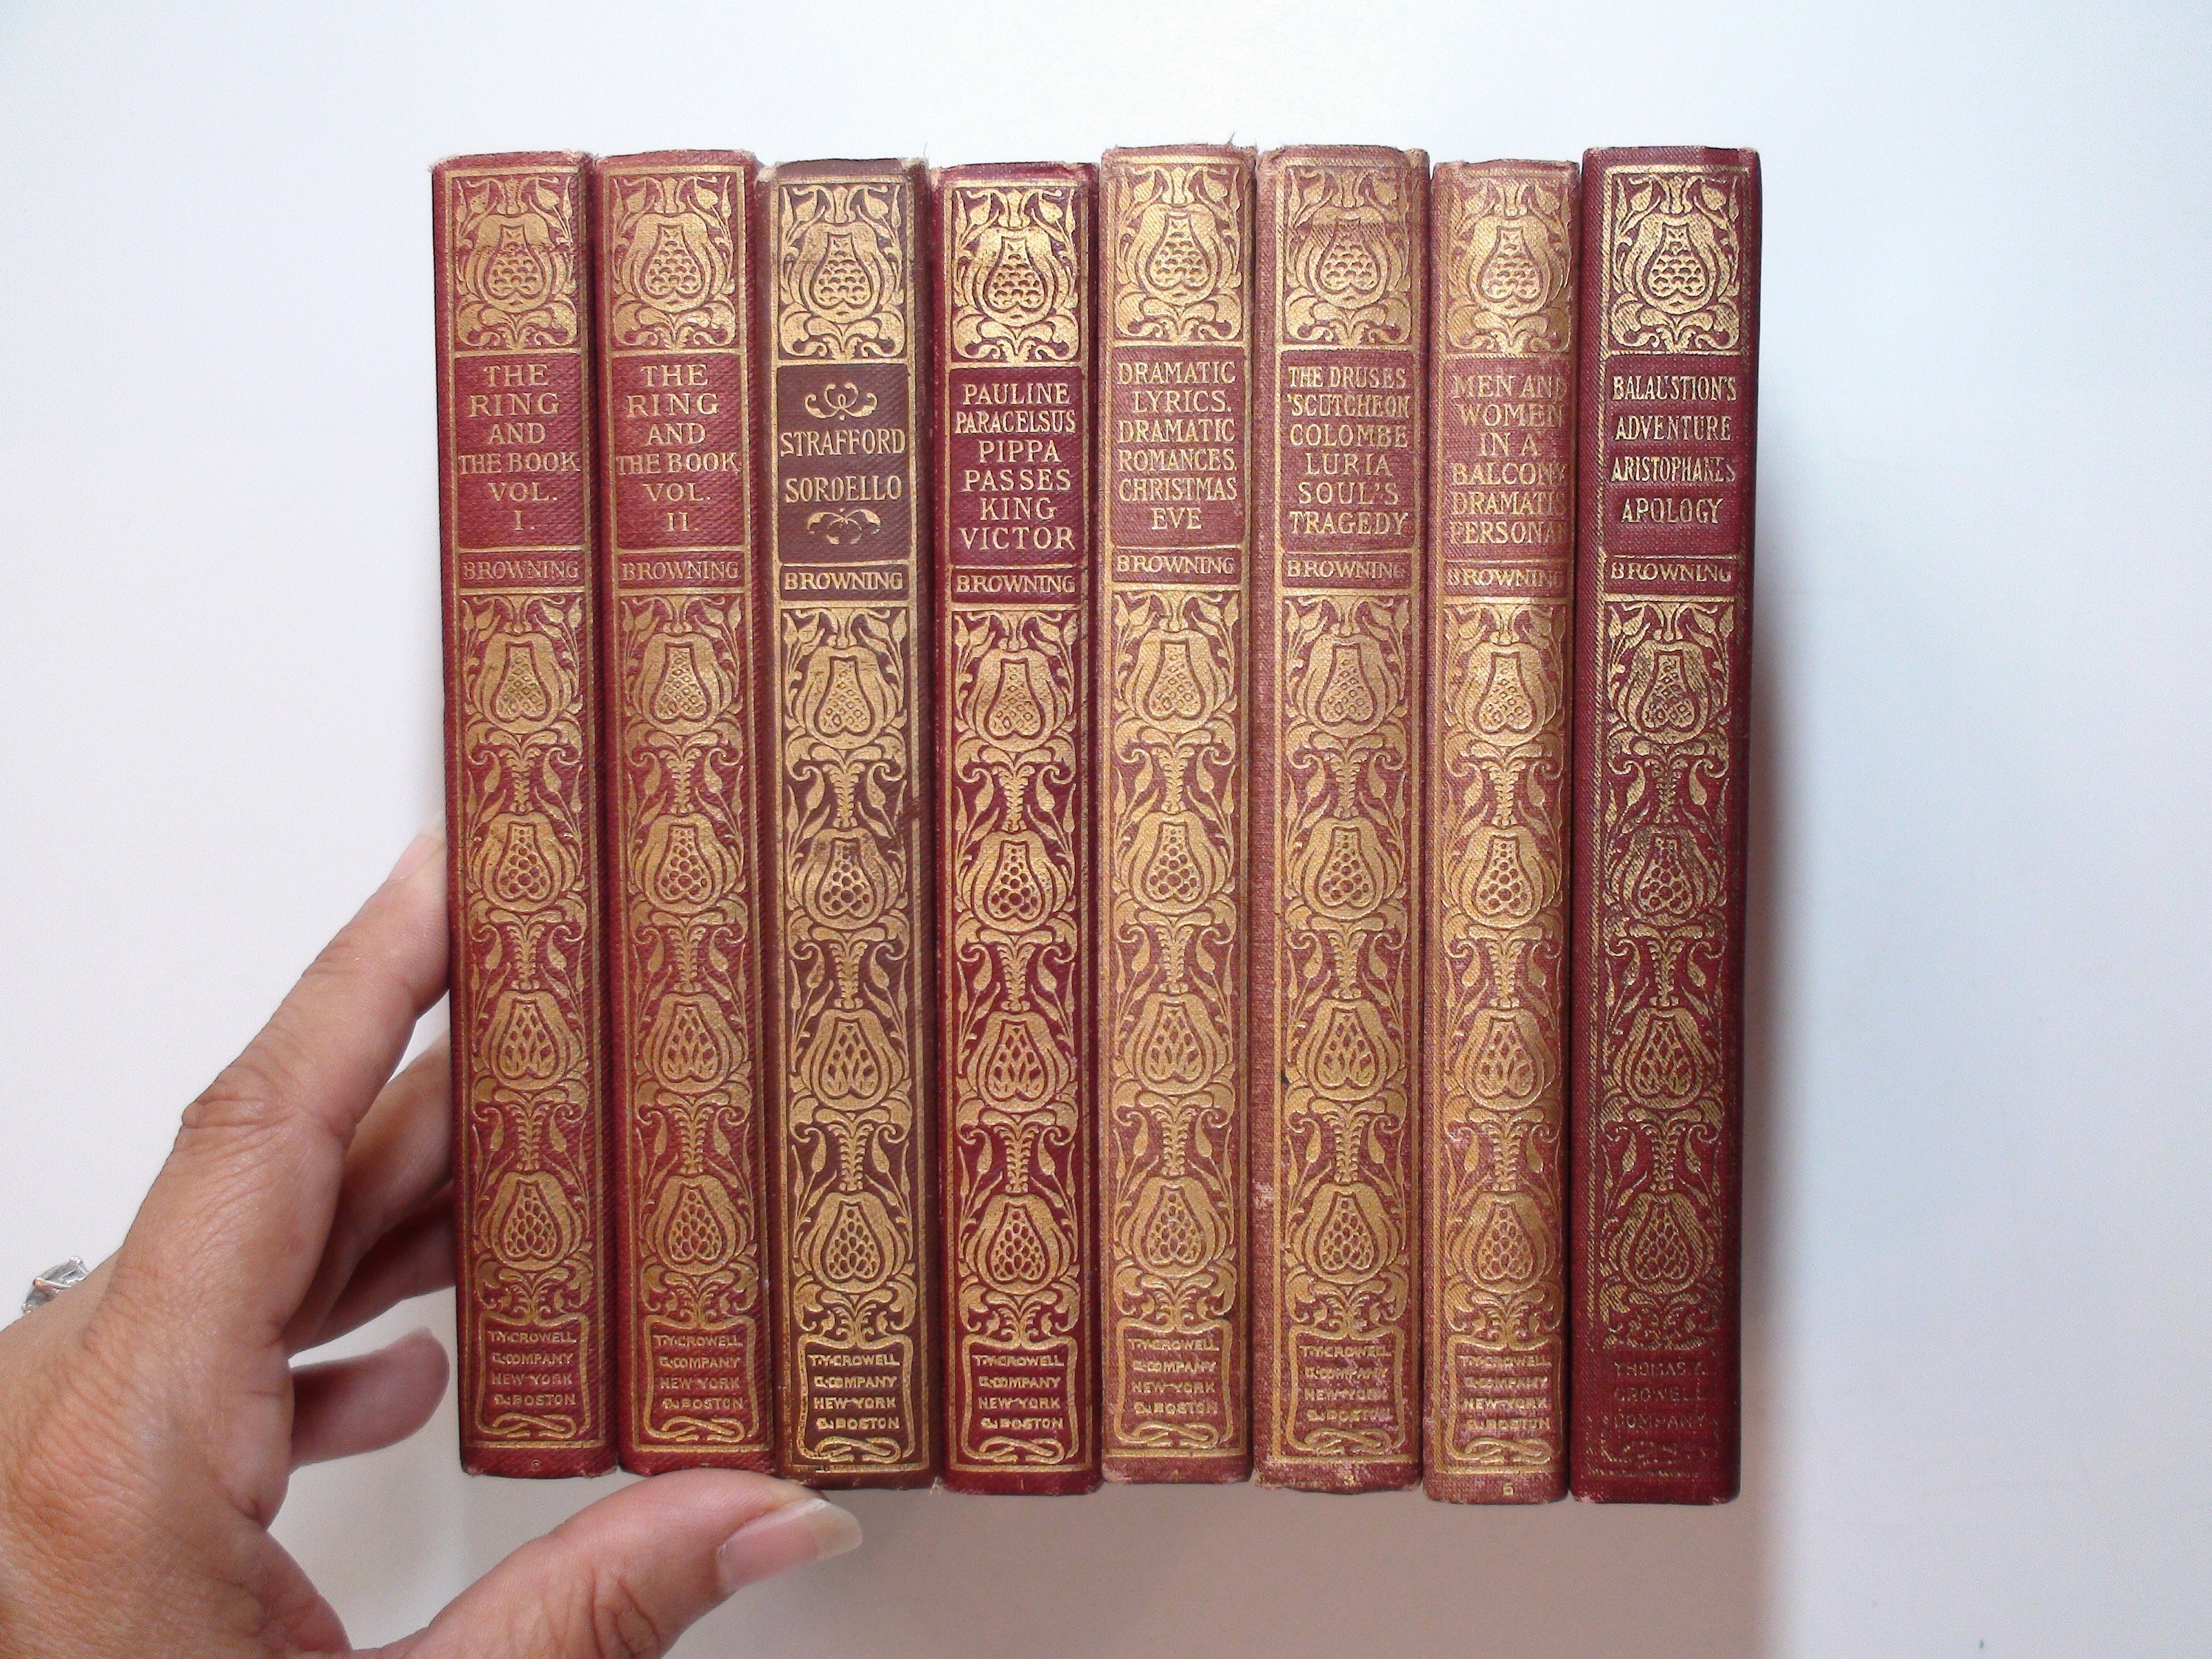 The Complete Works of Robert Browning, Partial Set of 8 Attractive Volumes, 1898